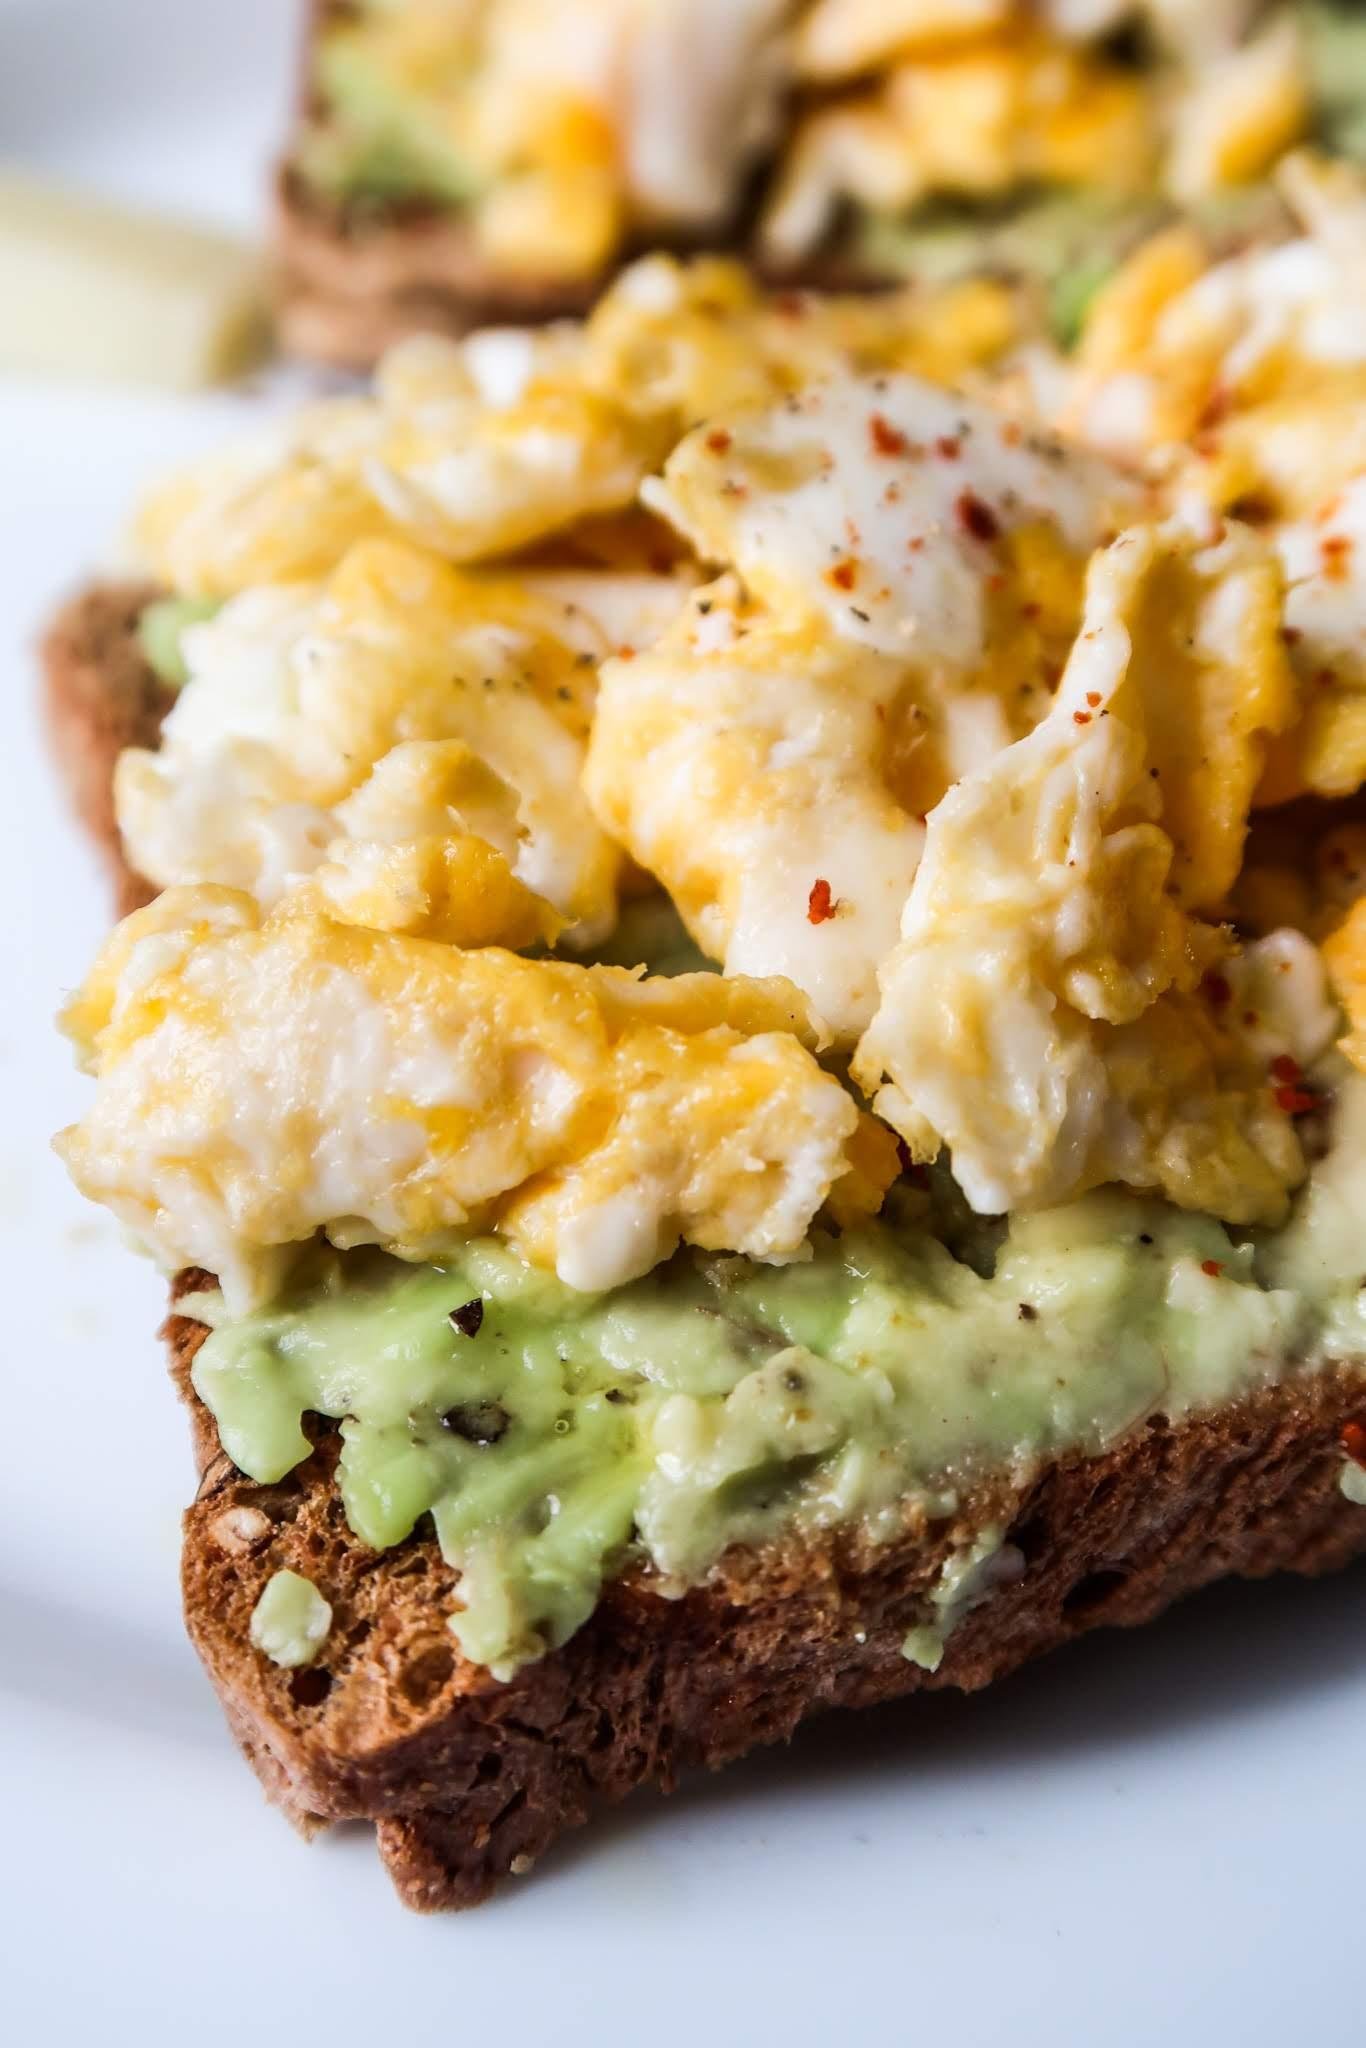 10-Minute Avocado Toast Recipe That Will Change Your Breakfast Game